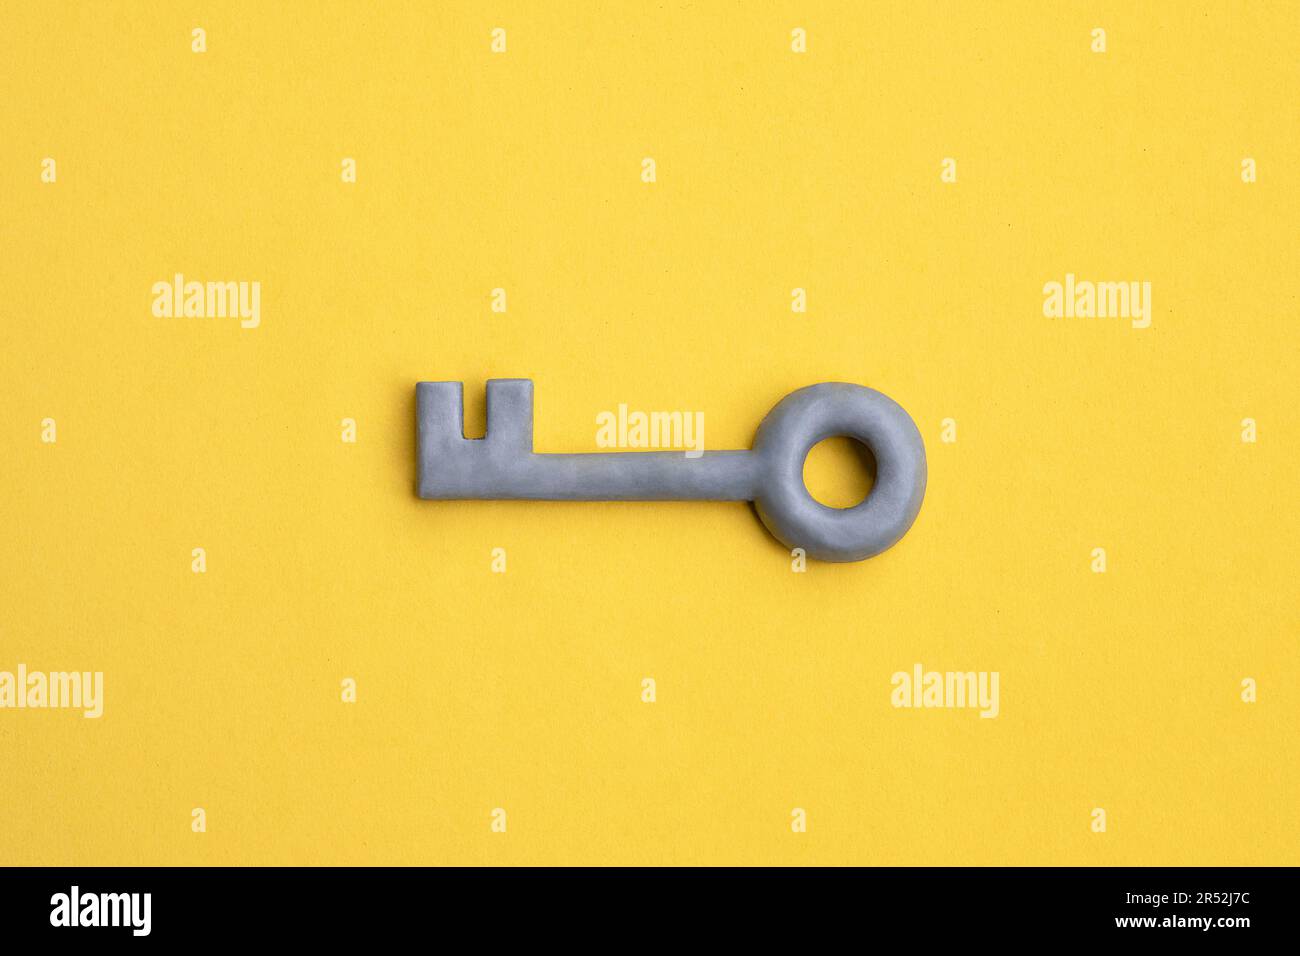 Plasticine key on yellow background. Safety, protection concept, internet password, security concept. Access or privacy symbol. Stock Photo